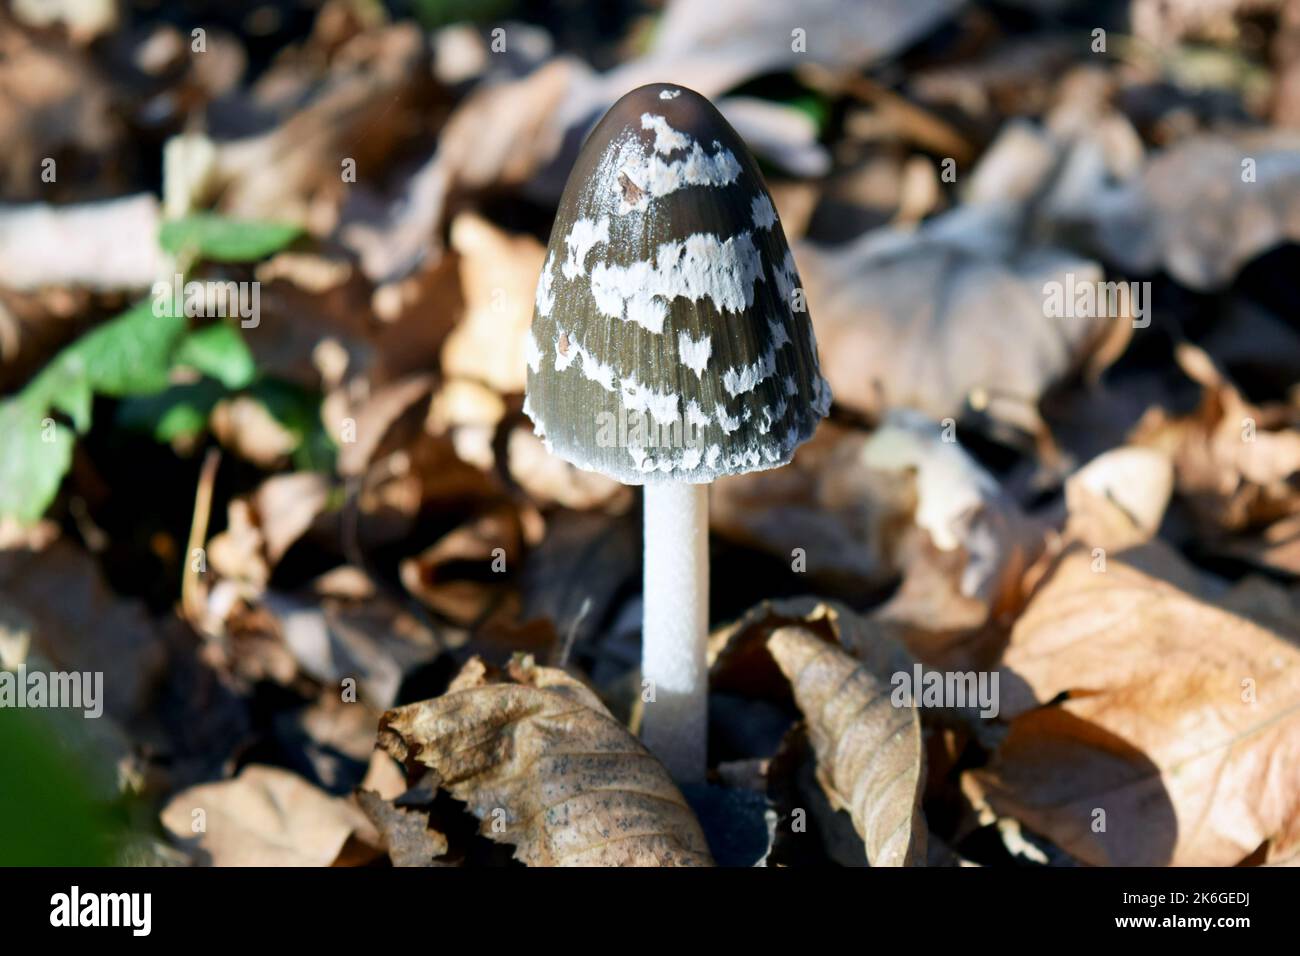 Close up photo of a wild mushroom in the forest named Magpie inkcap fungus. The cap is egg-shaped, later it opens up and takes on a bell shape. Stock Photo